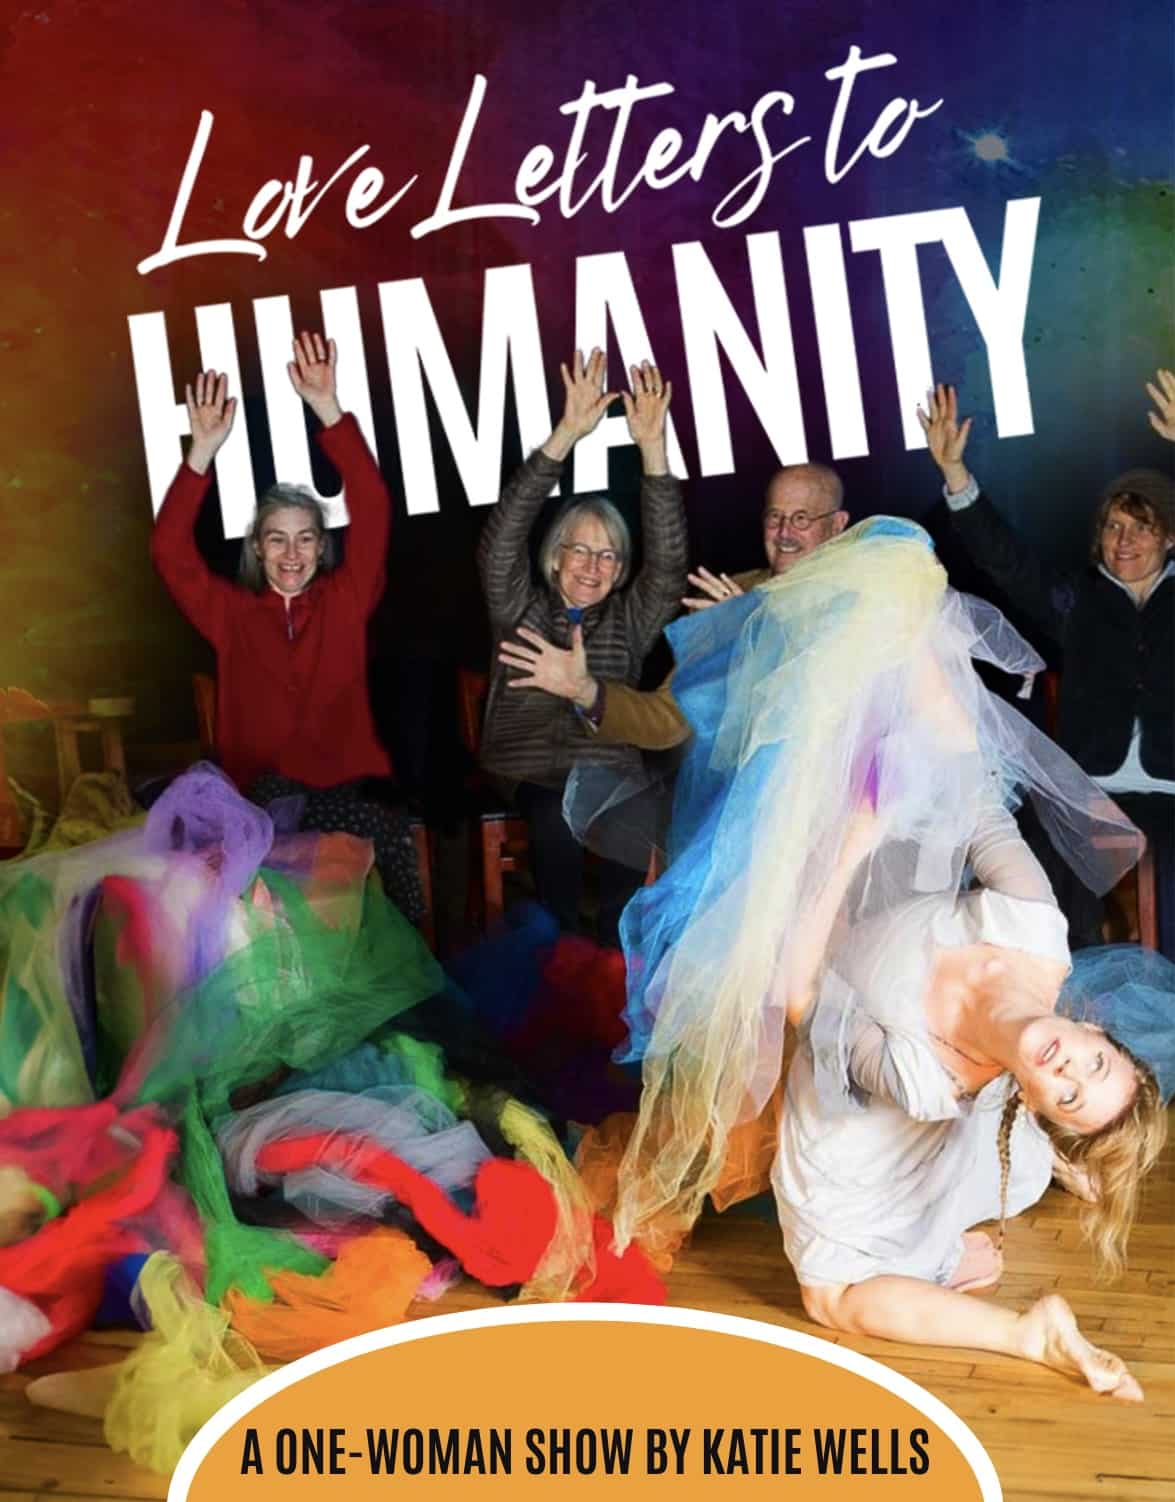 LOVE LETTERS TO HUMANITY fLIER